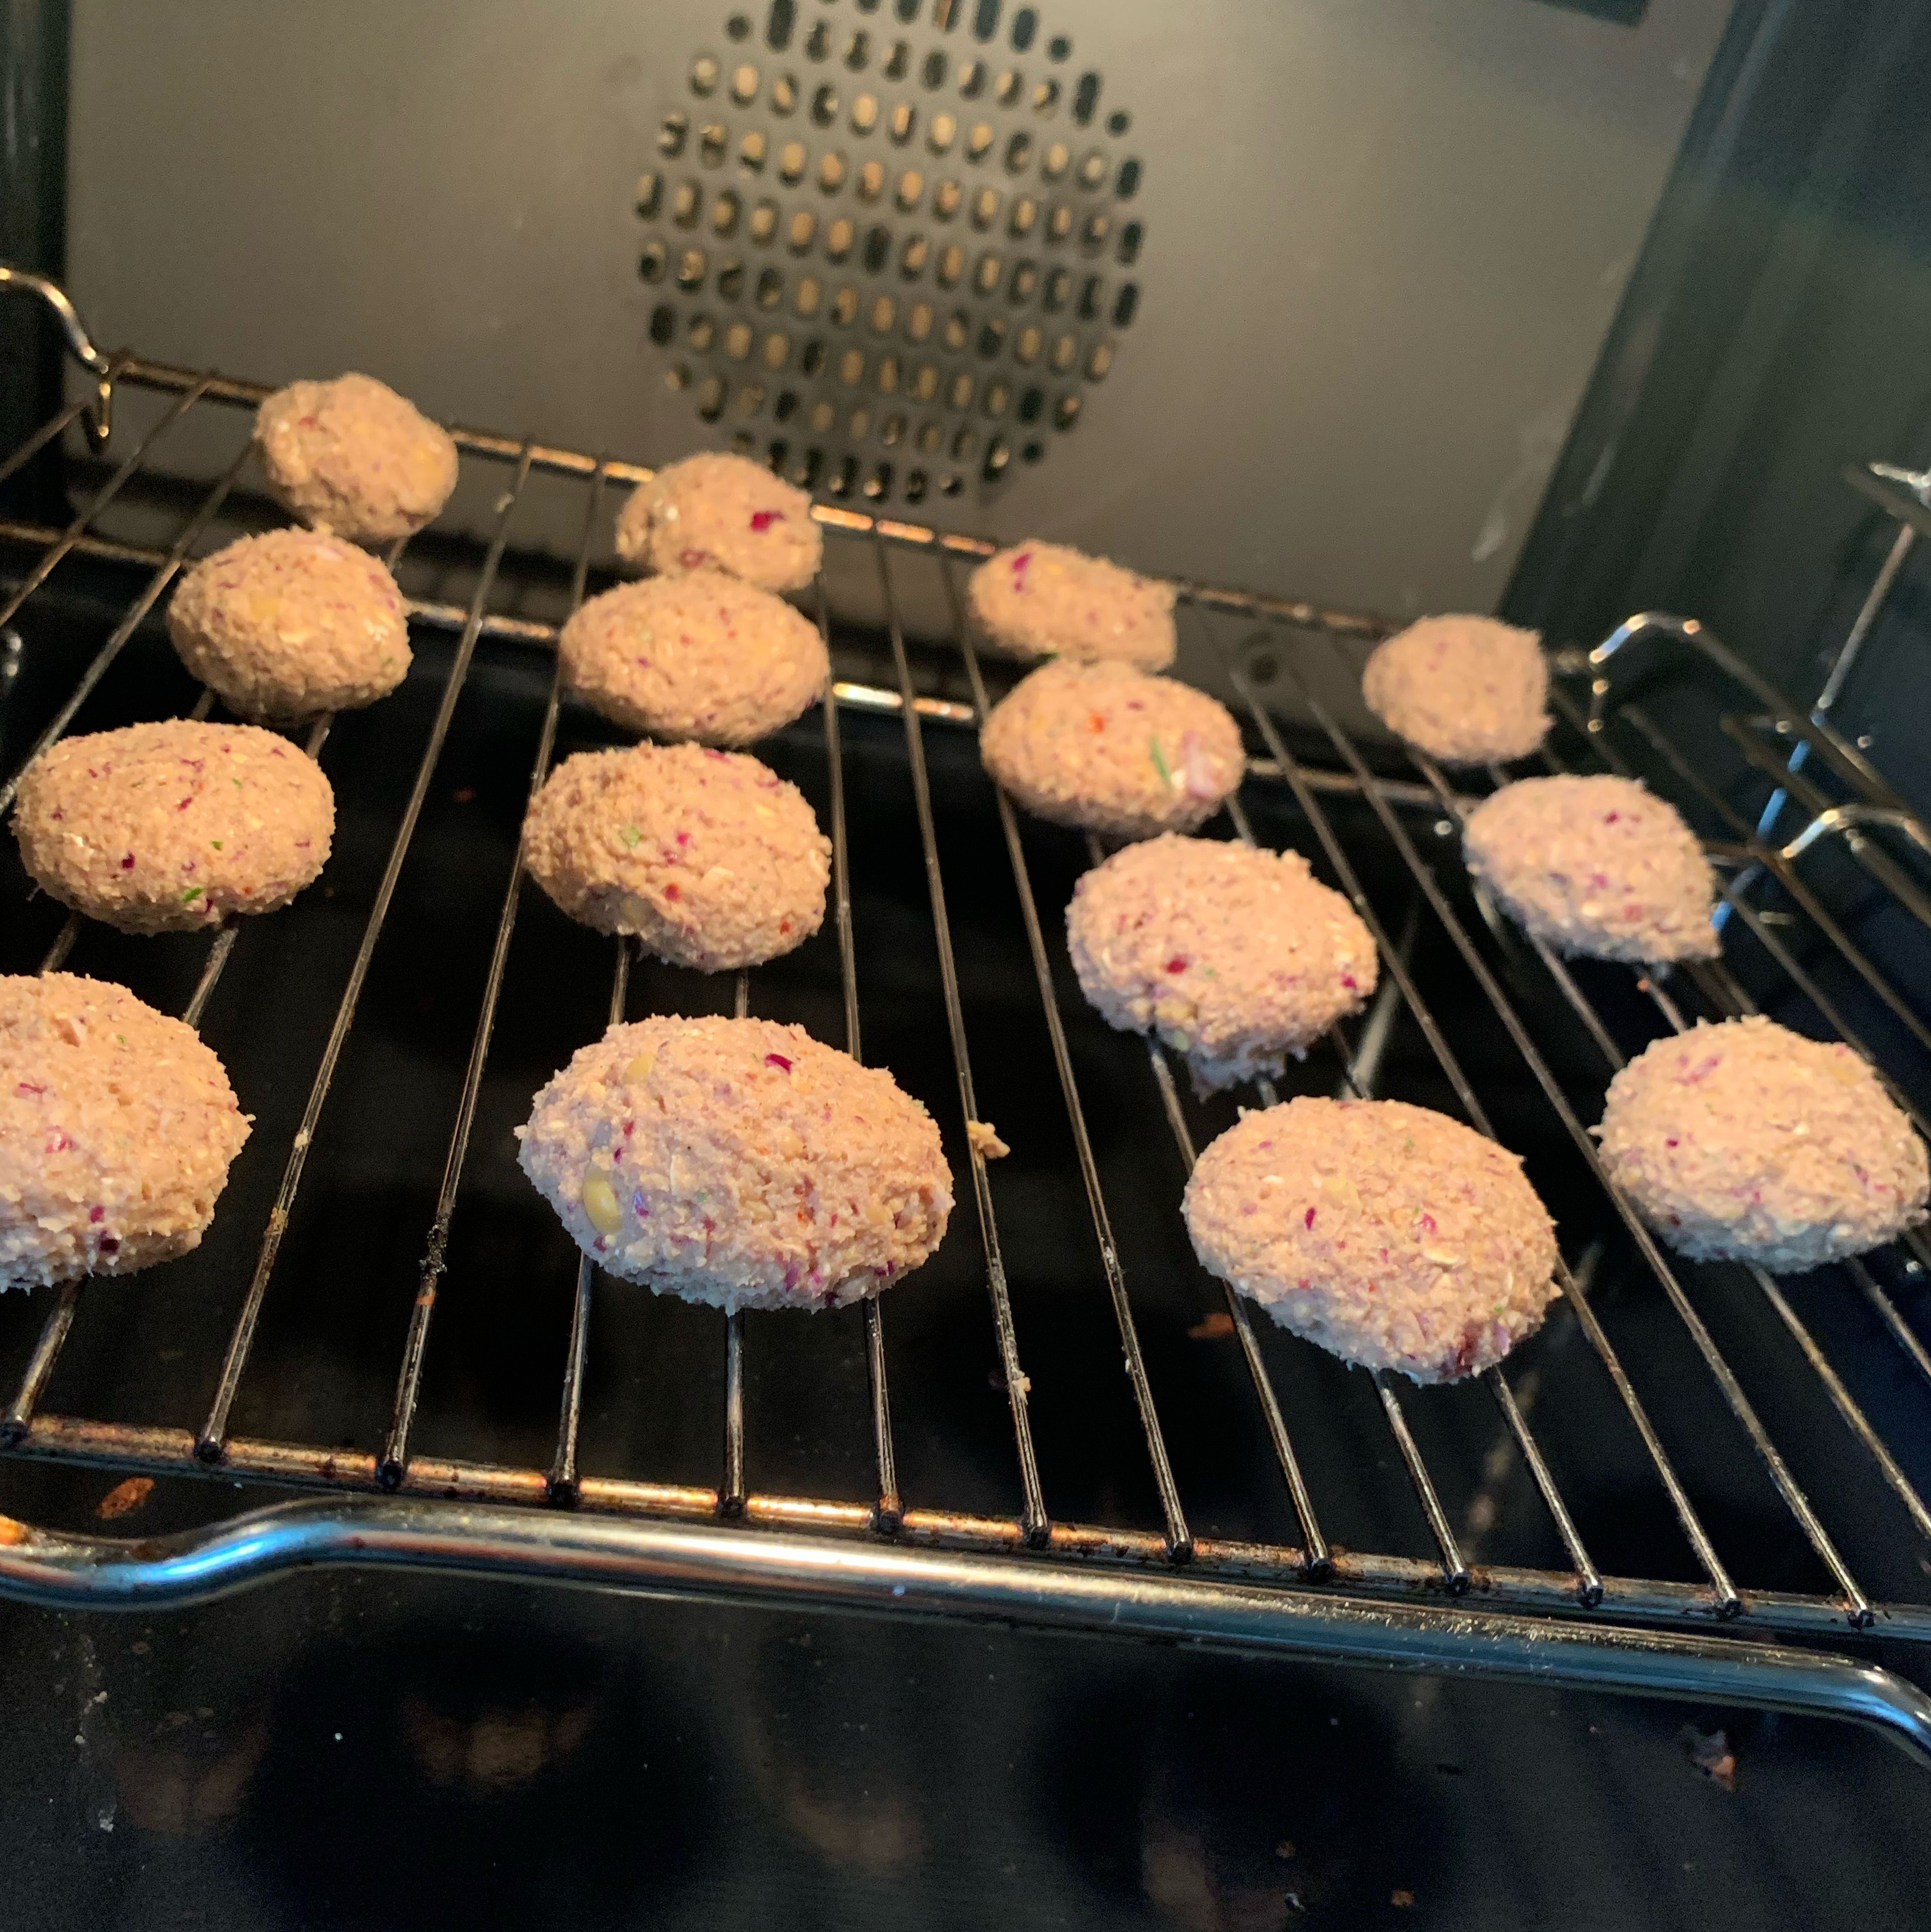 Blend the ingredients and form them into tiny balls. The mixture is very moist. If it is too hard for you to roll them, you can add more oats but it will make them taste drier as well. Place onto an oven rack and start the oven to 200 degree Celsius, no preheating needed. Bake for at least 25 min.